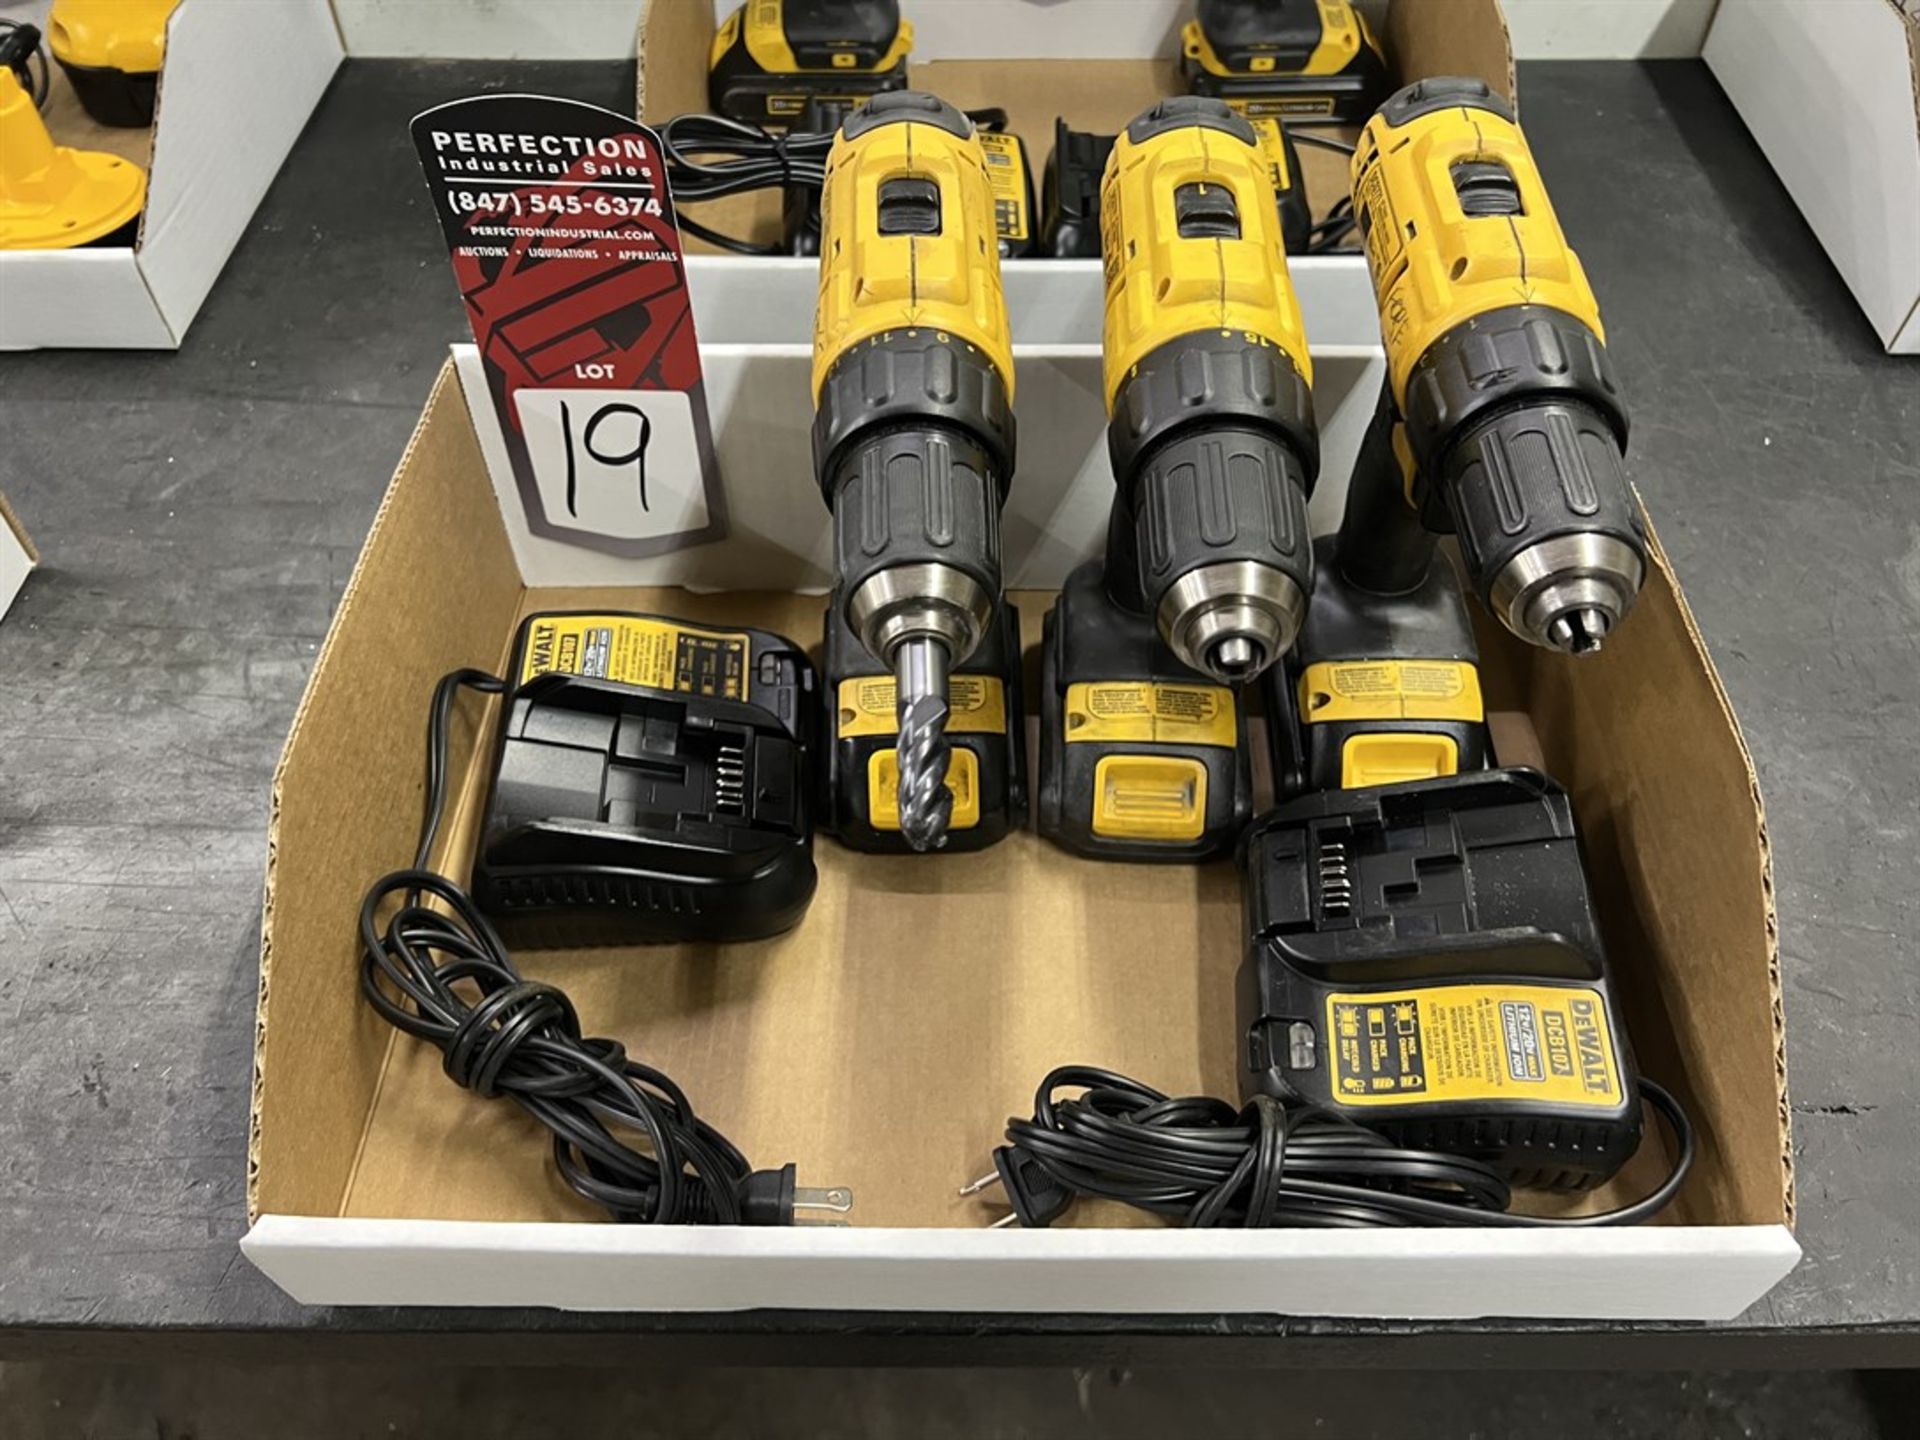 Lot of (3) DEWALT DCD771 1/2" Cordless Drill Drivers w/ Batteries and Charger